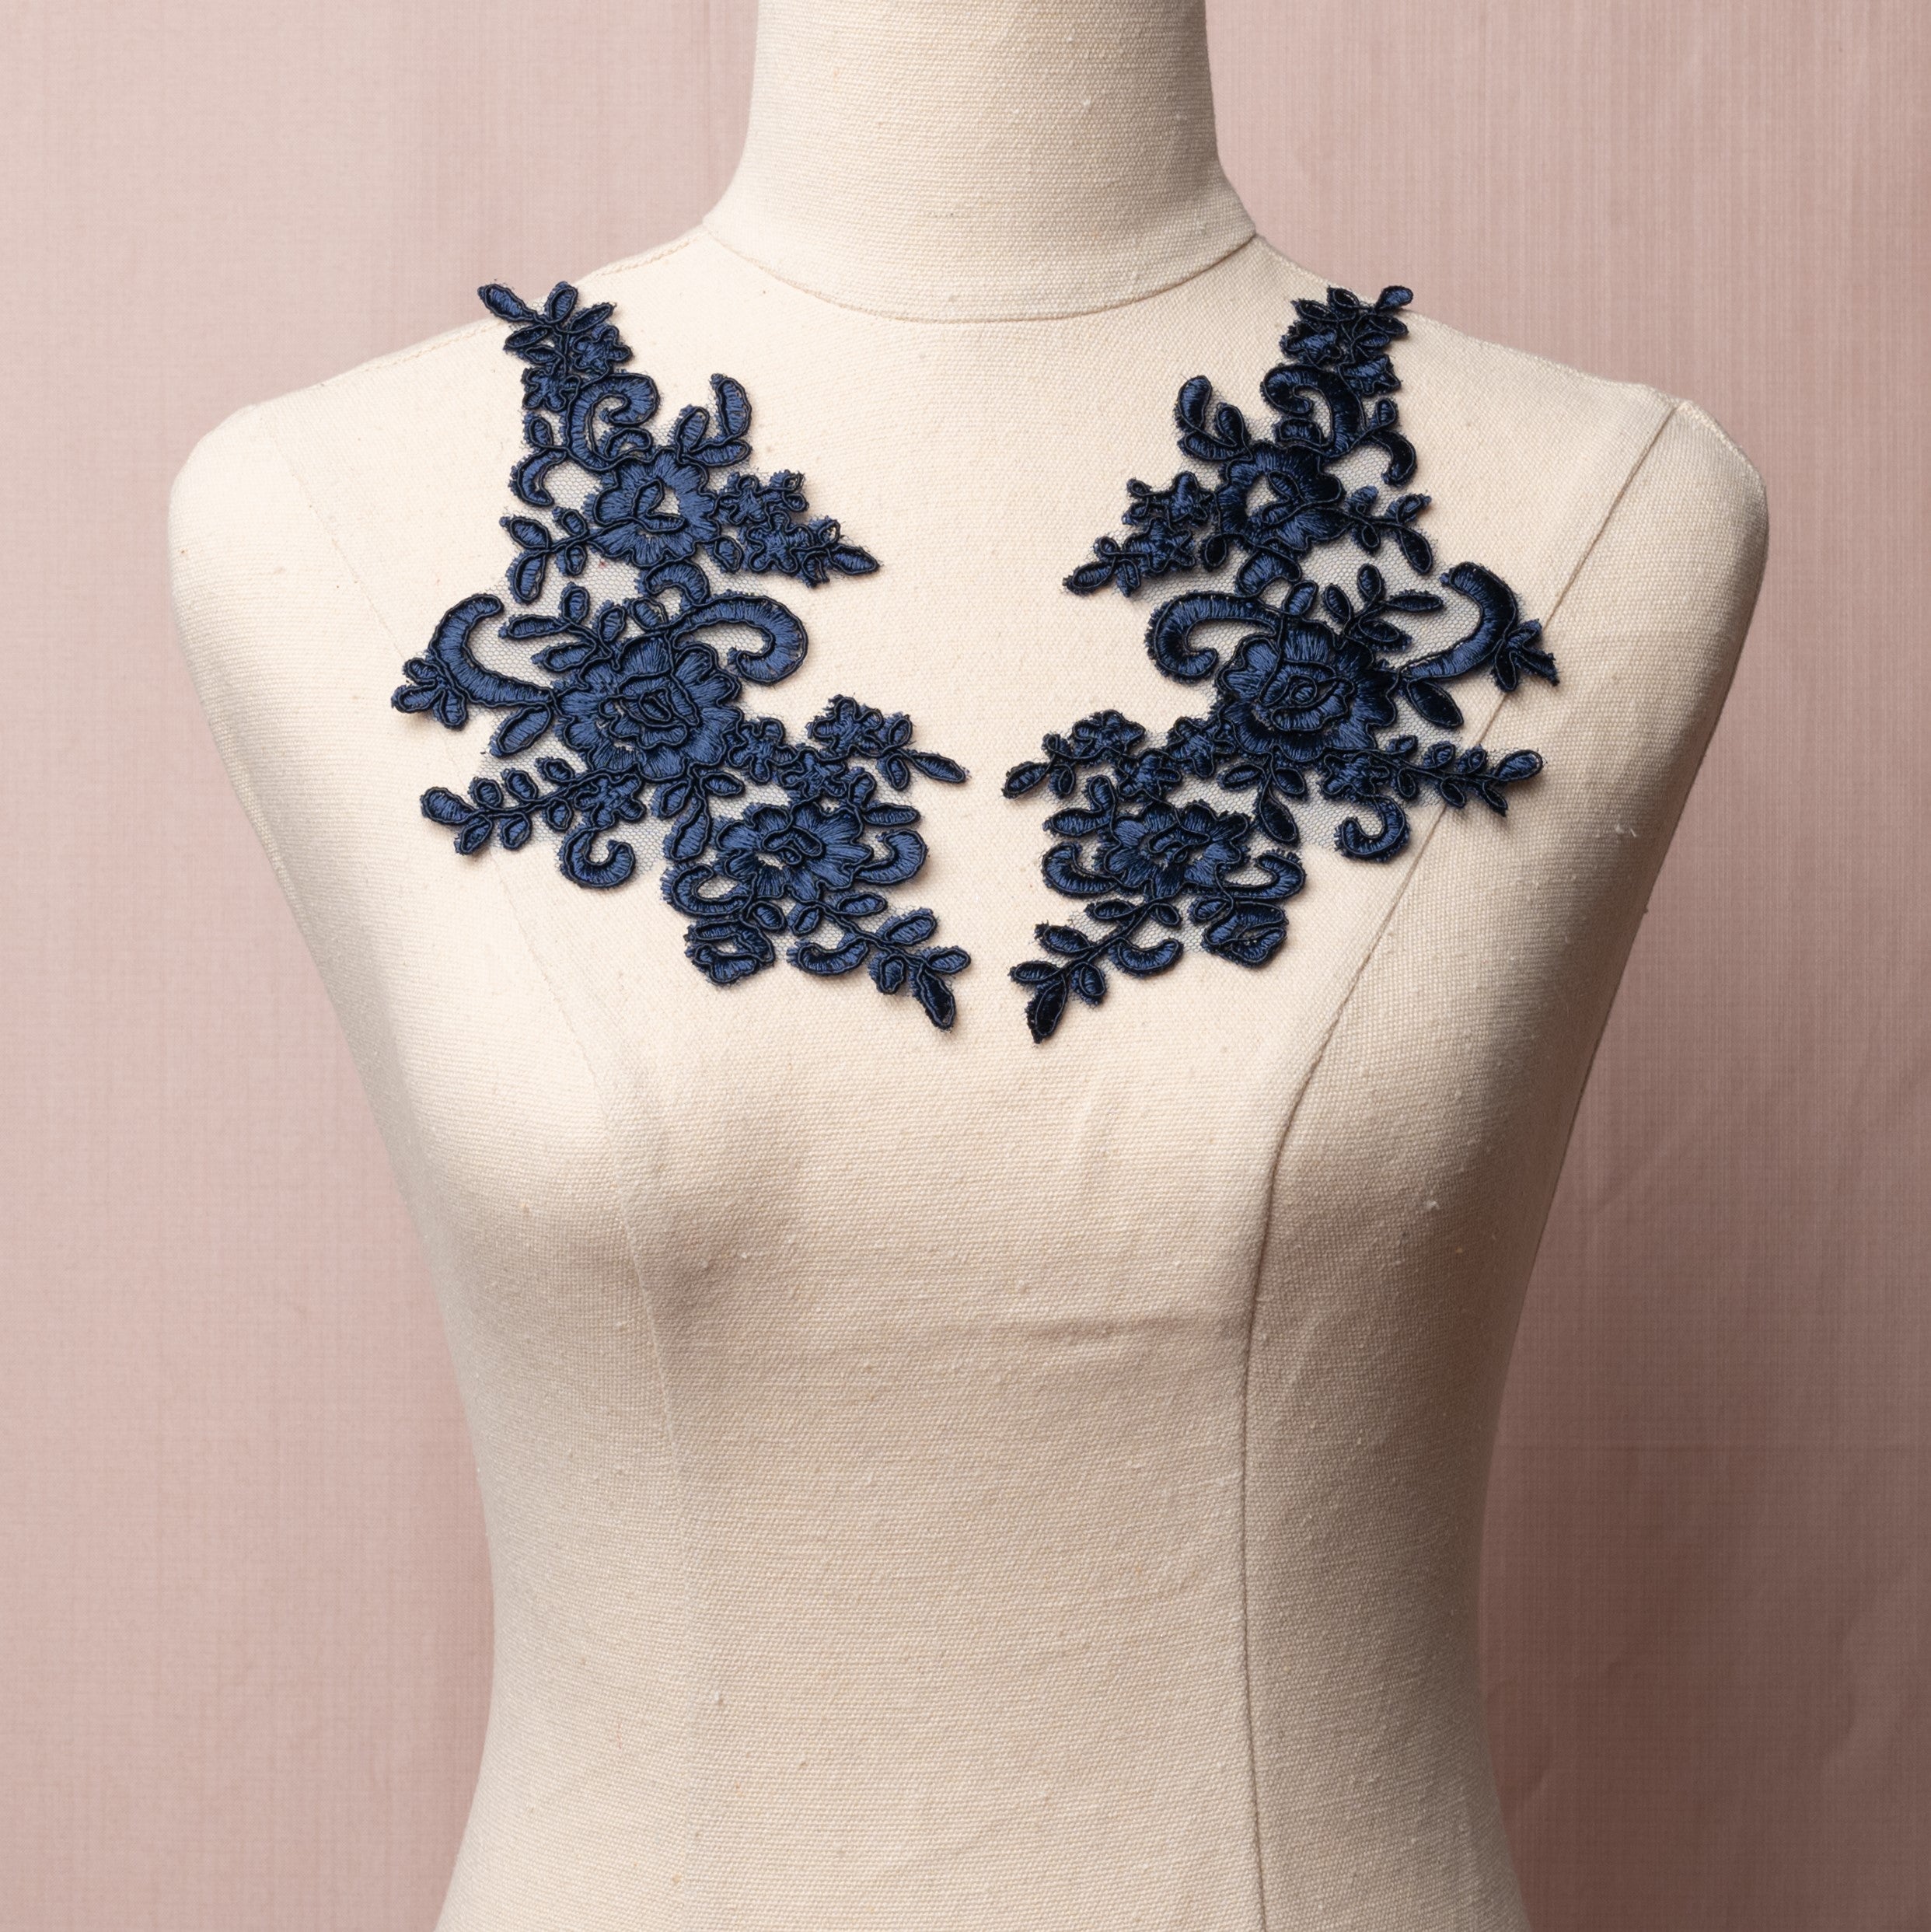 Navy blue embroidered floral applique with corded edging.  The applique is embroidered onto a net backing and displayed on a mannequin.